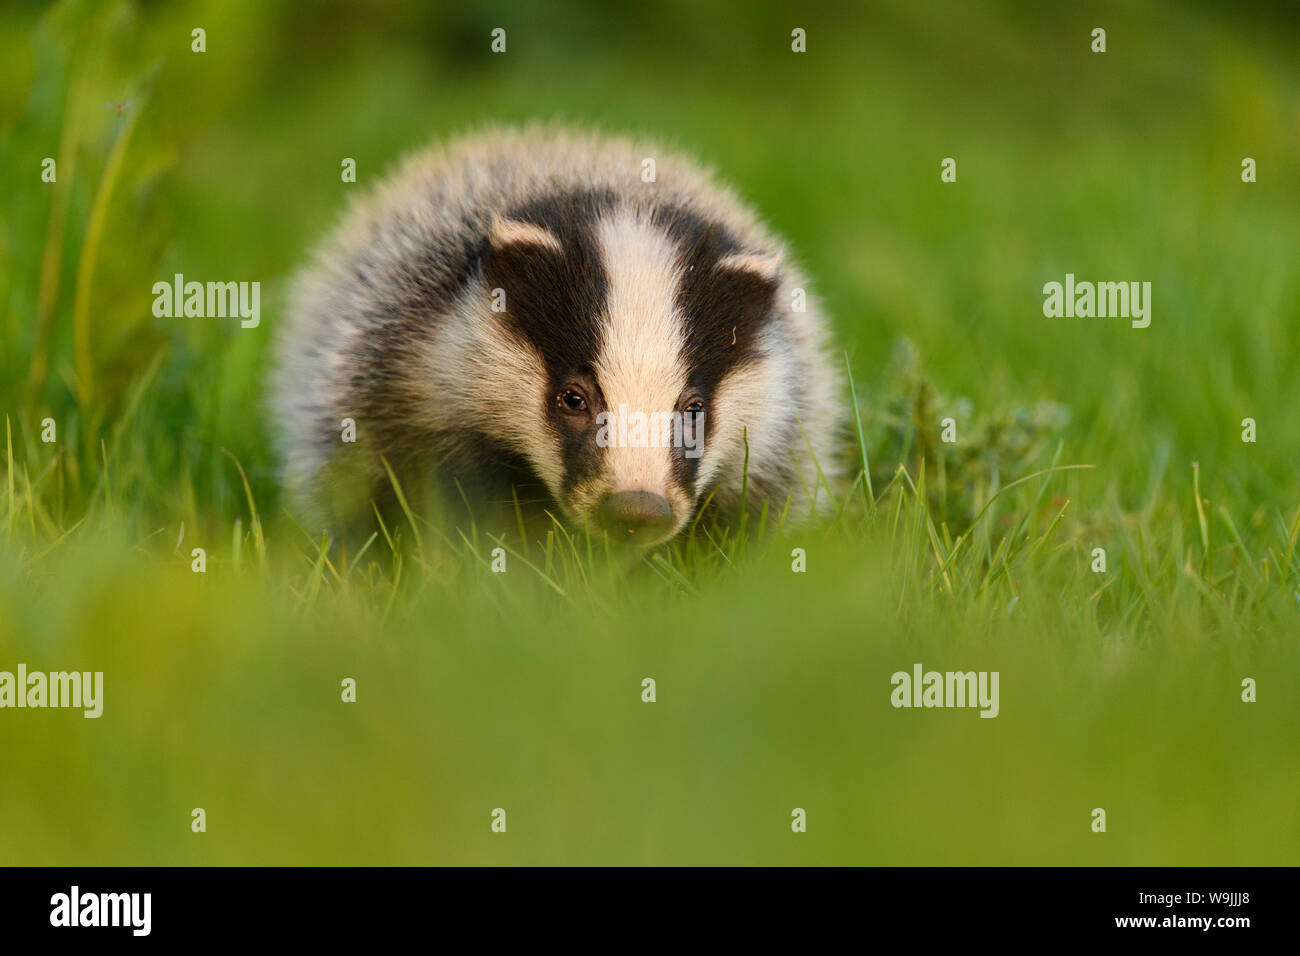 Badger (Meles meles) young cub in grass, Staffordshire, England, May Stock Photo